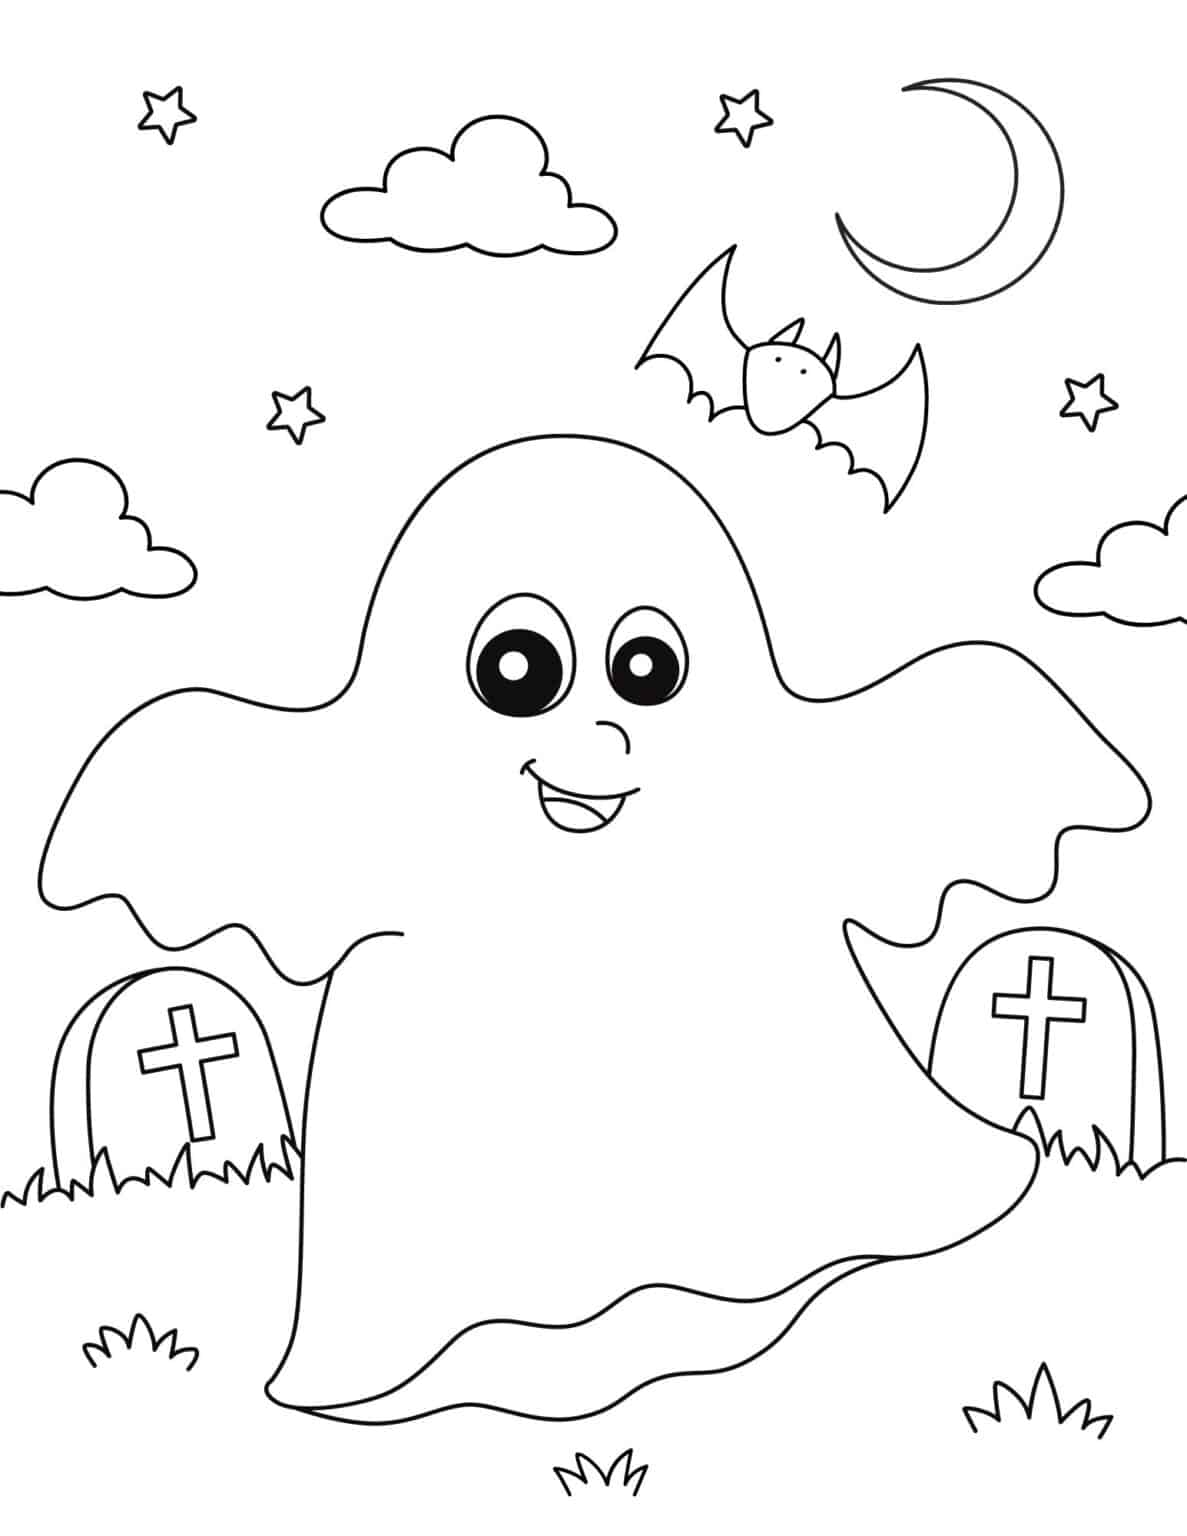 Free Printable Ghost Coloring Pages - Prudent Penny Pincher